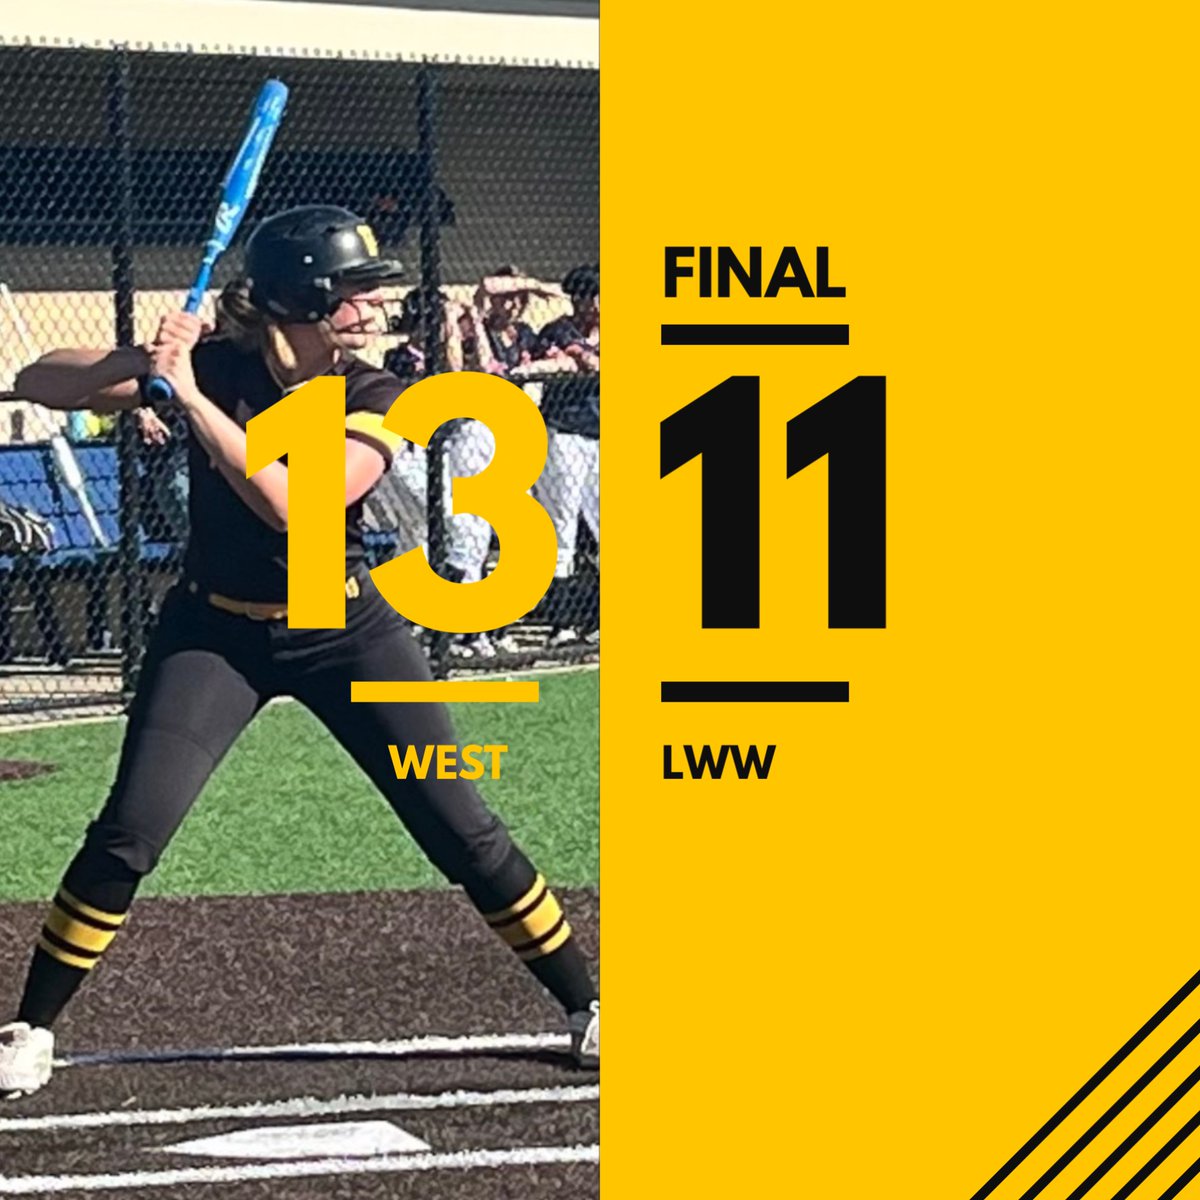 Big win over LWW with a walk off grand slam from Brooke Schwall!